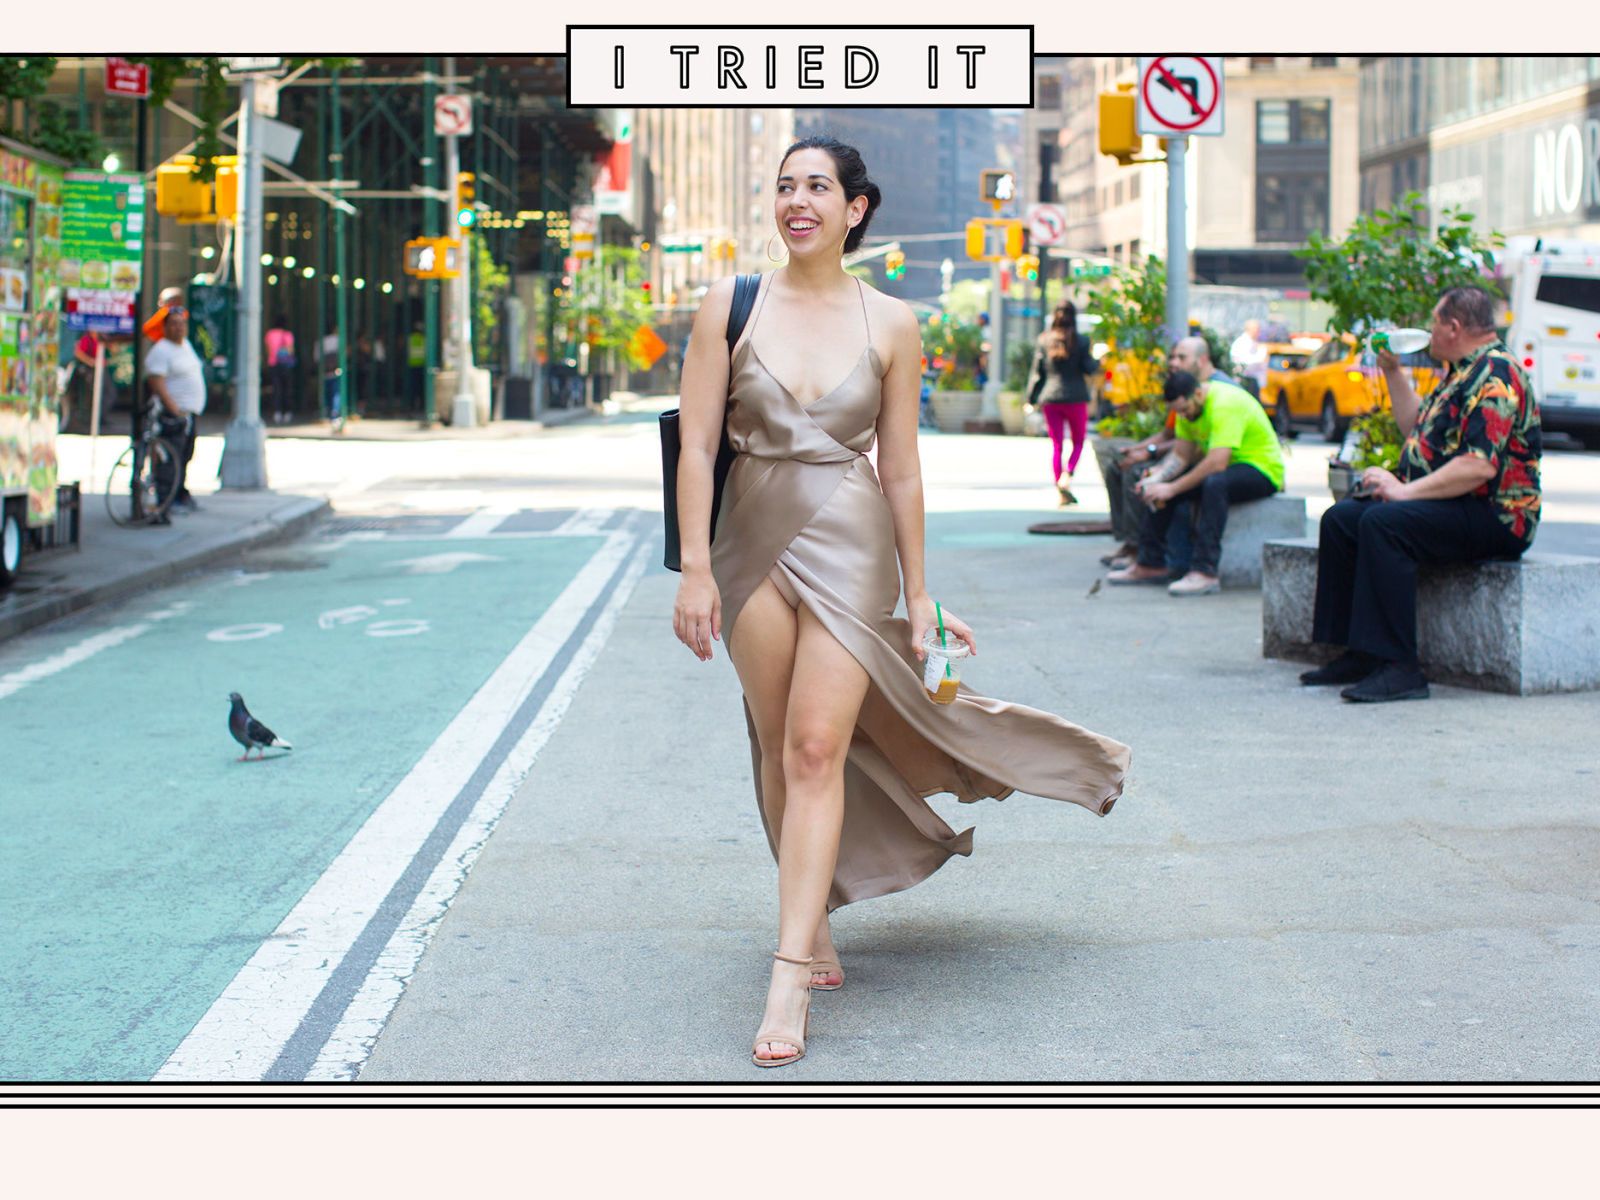 I Tried Wearing a High Slit Dress Like Bella Hadid image picture